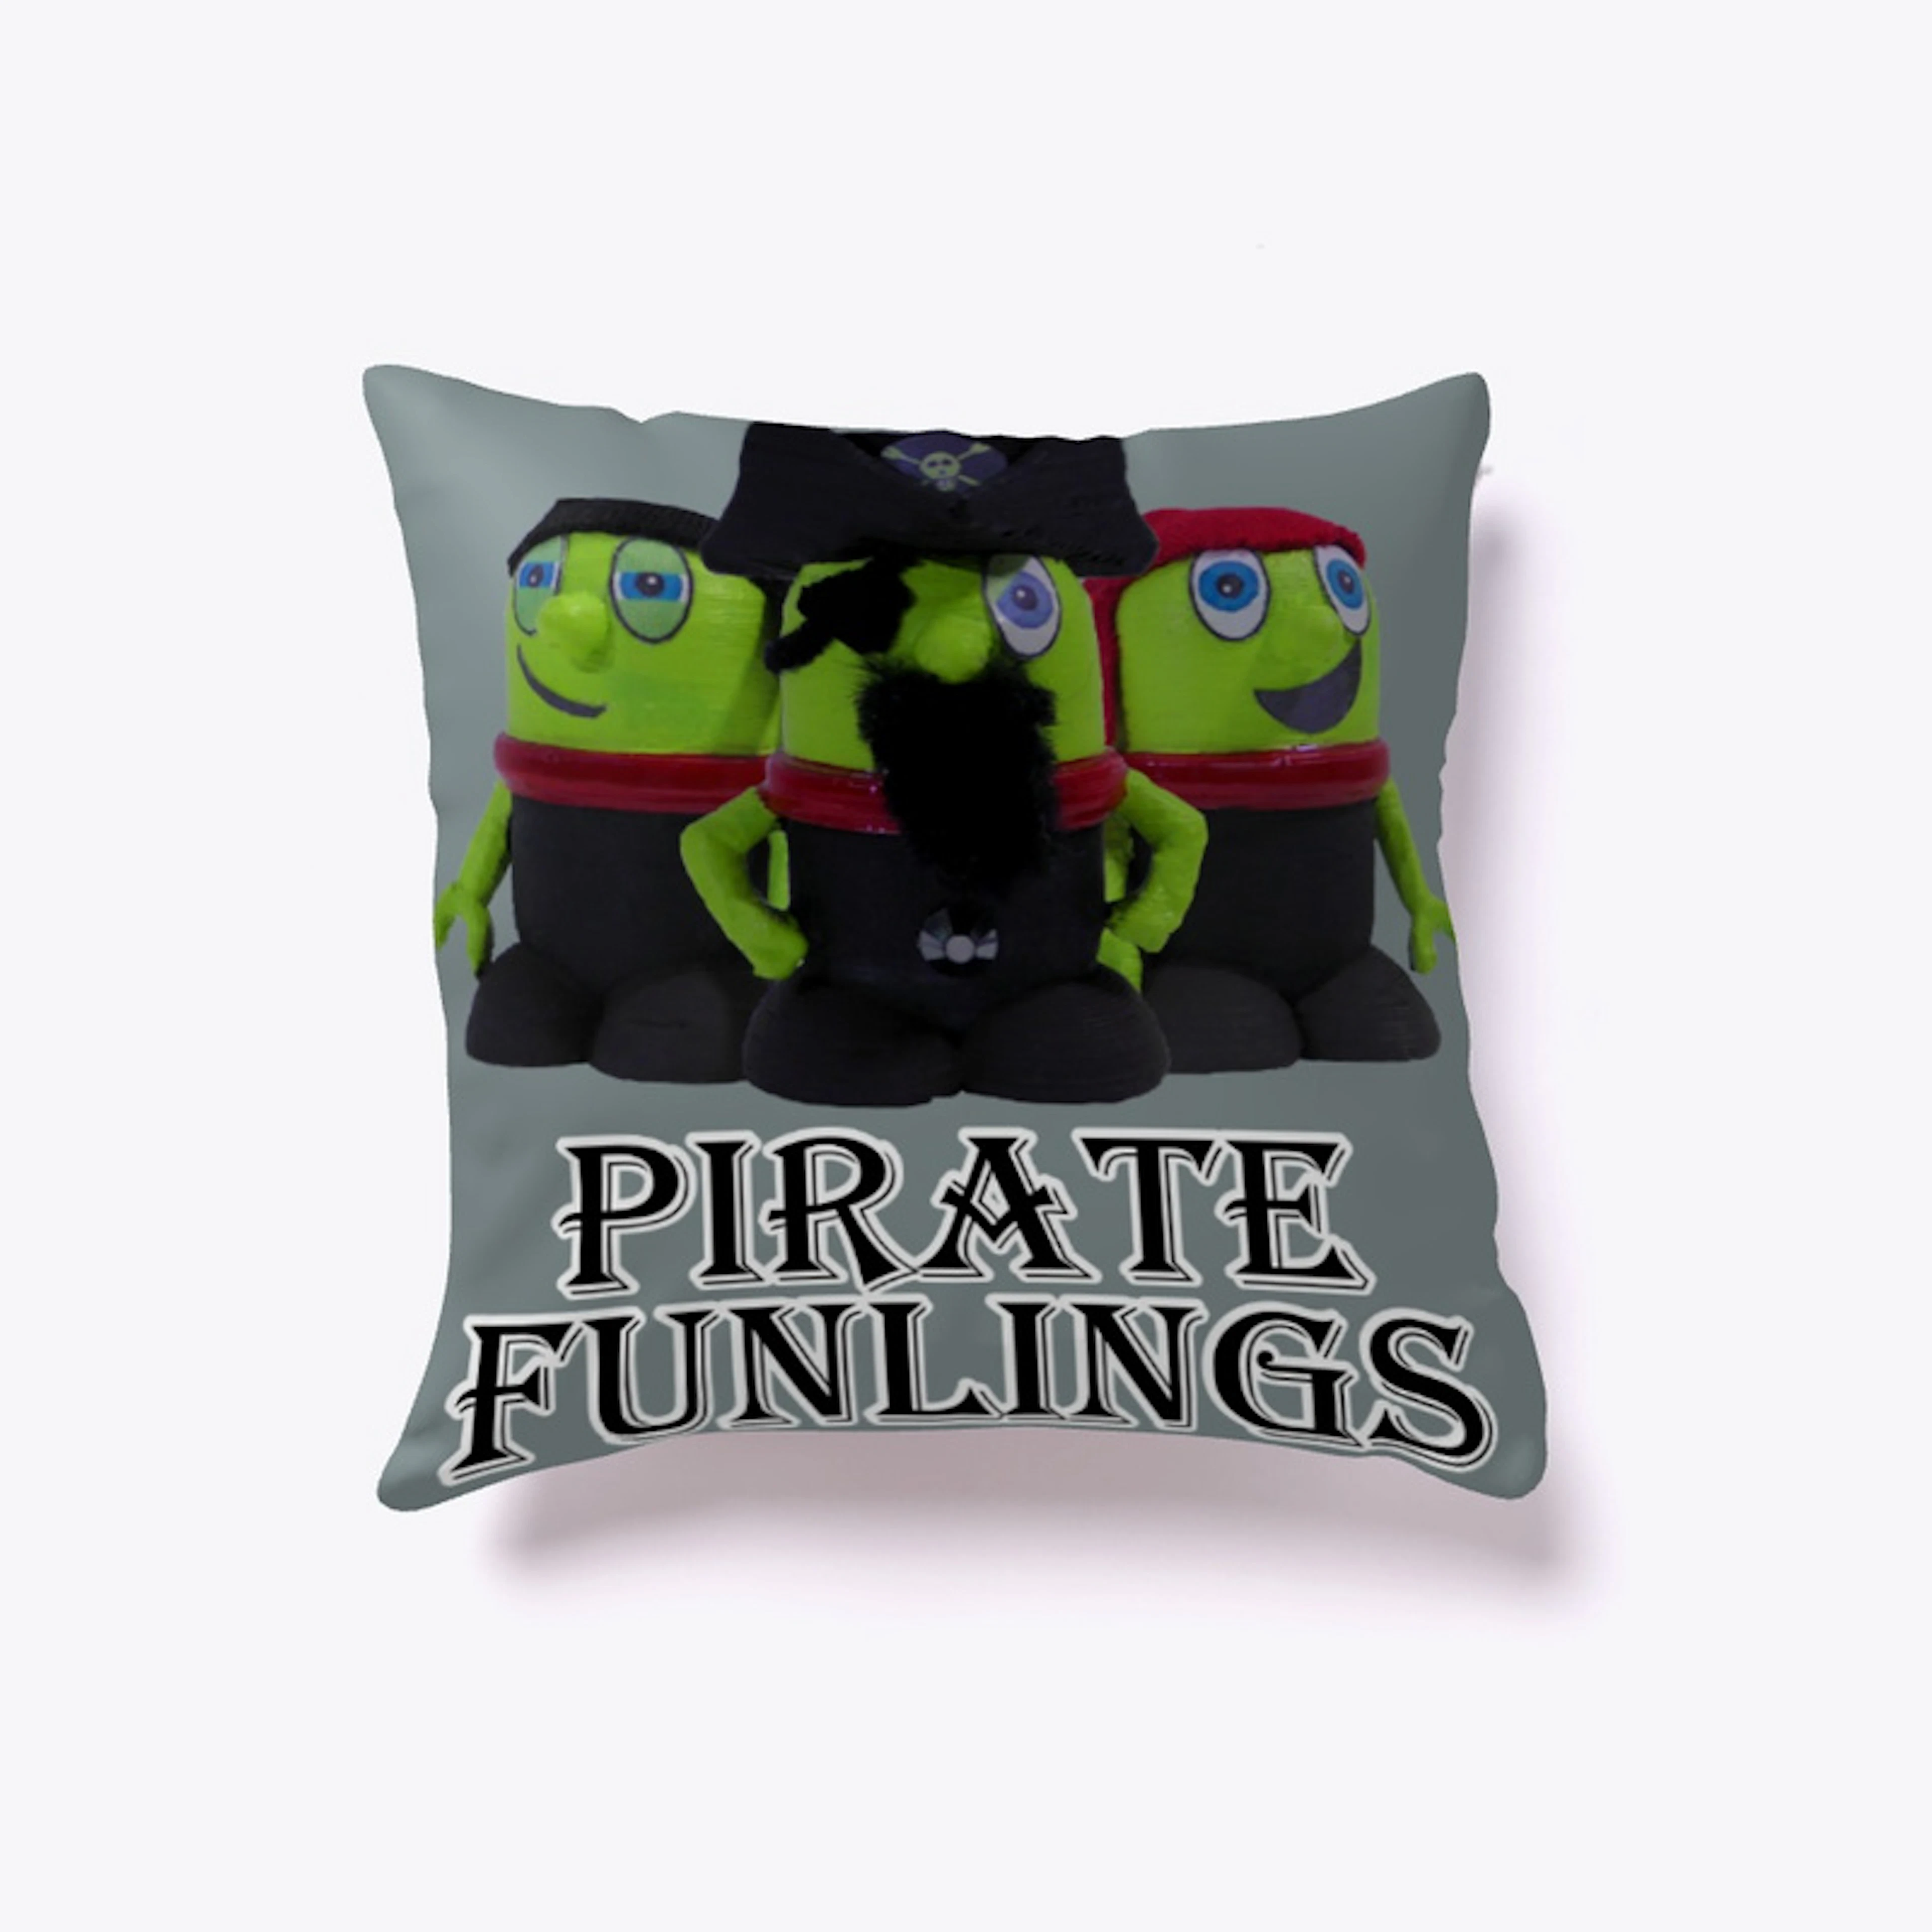 Indoor Pillow with Pirate Funlings